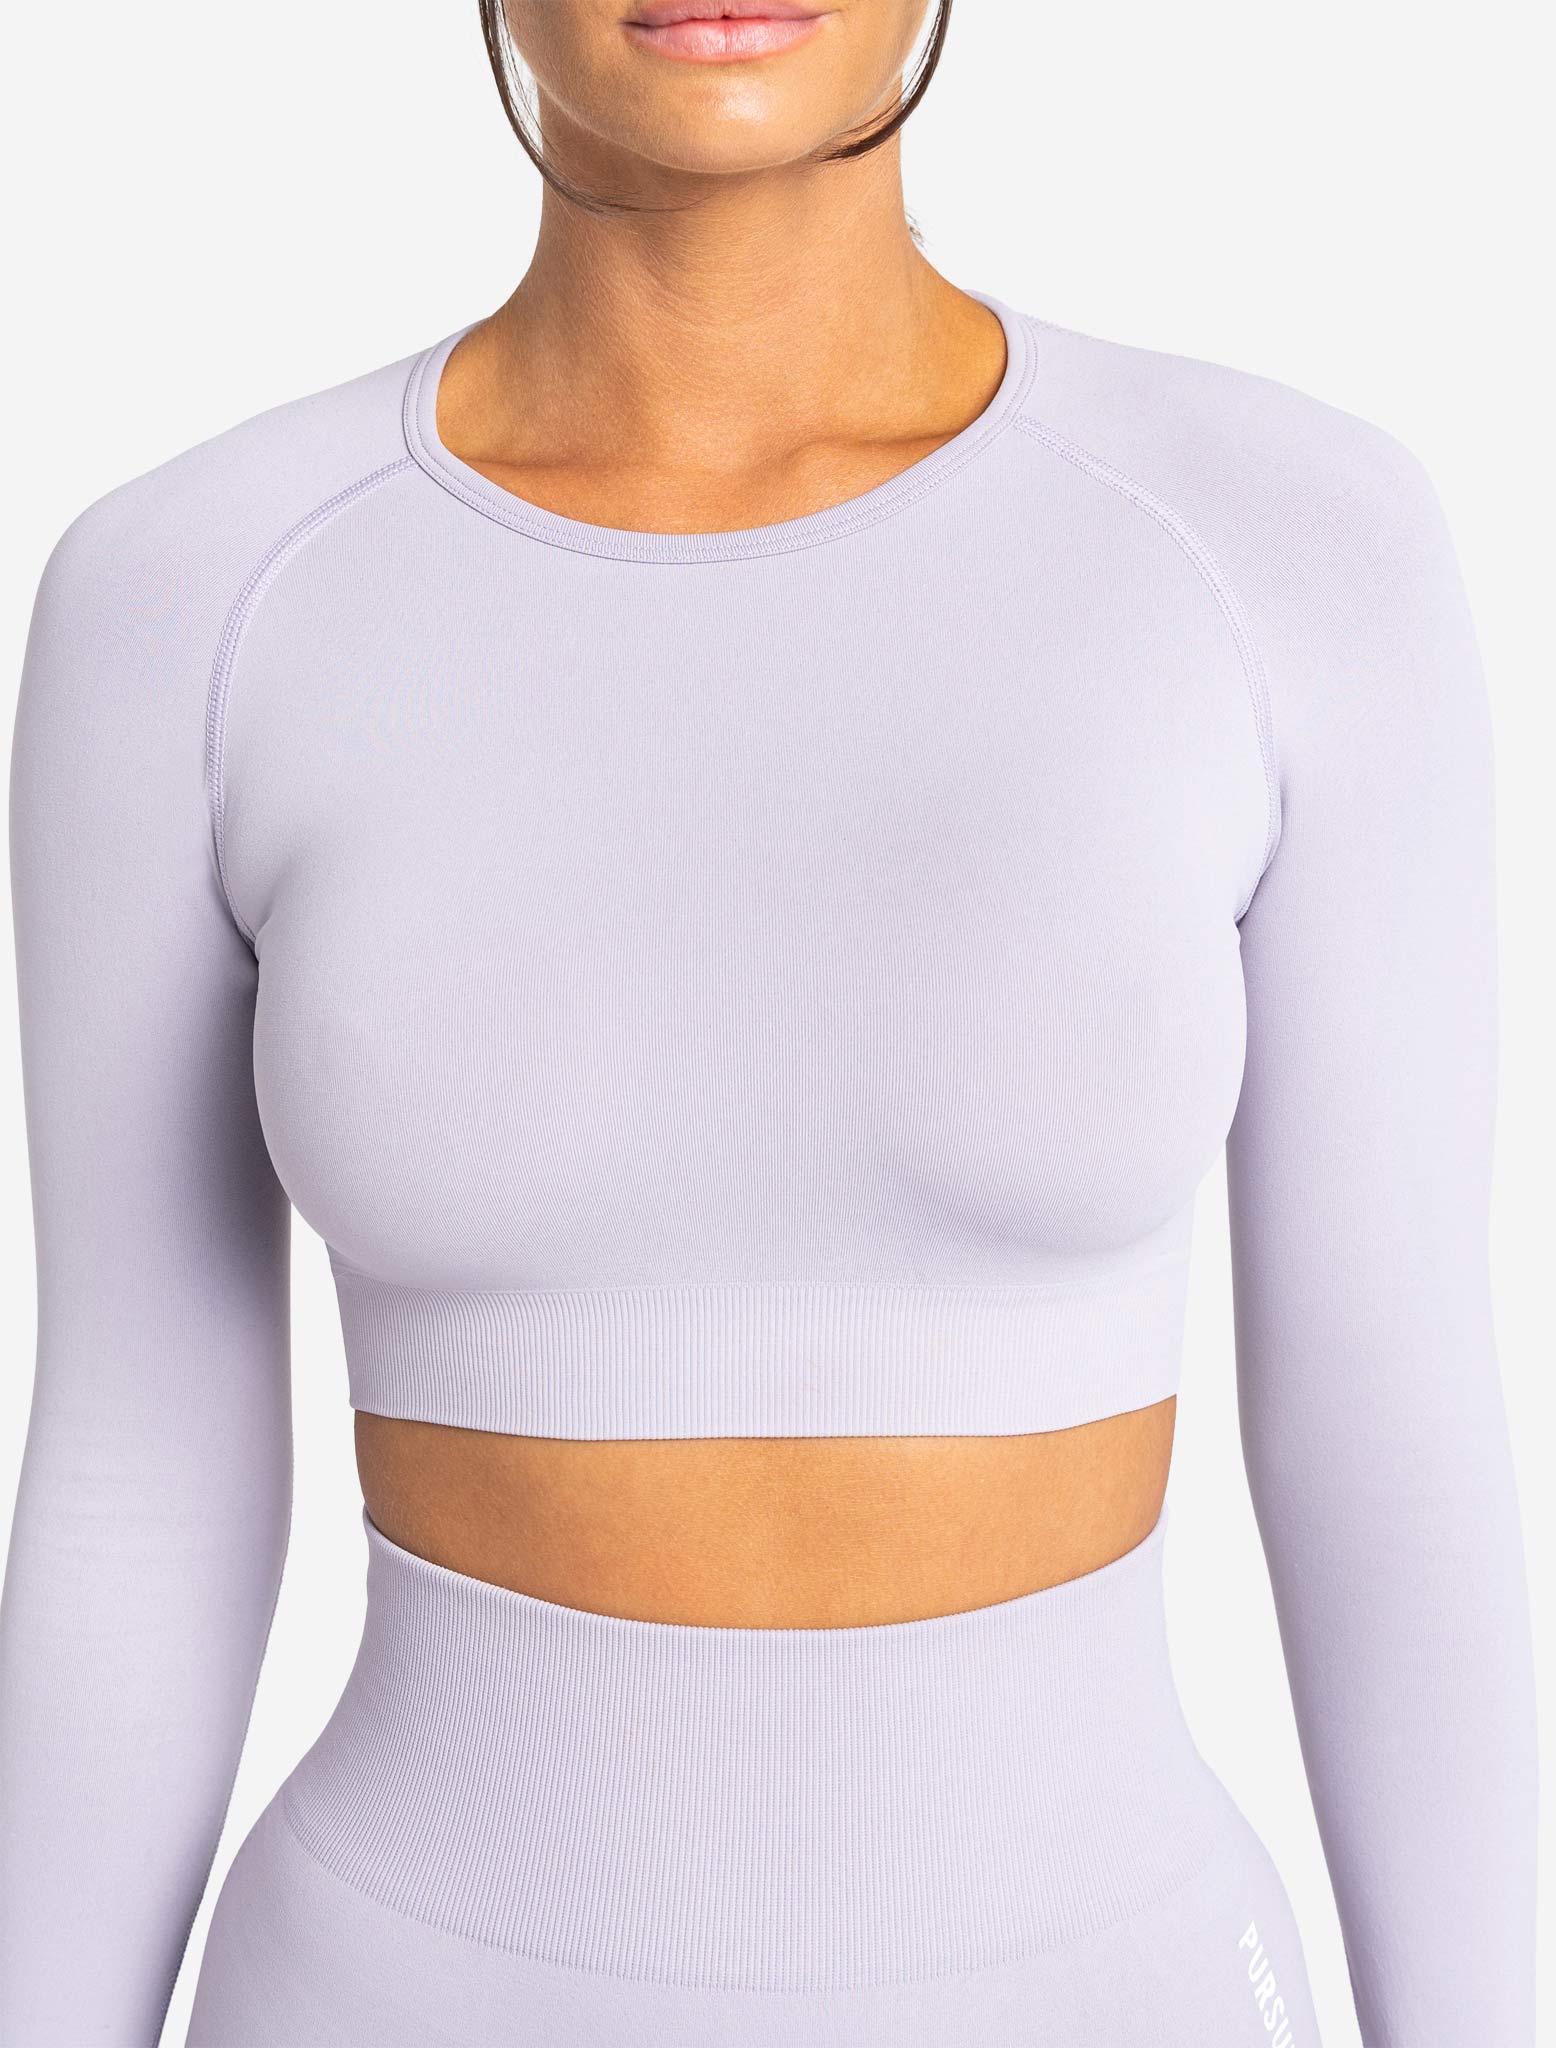 Muscle Fit Gym Ombre Seamless Long Sleeve Top